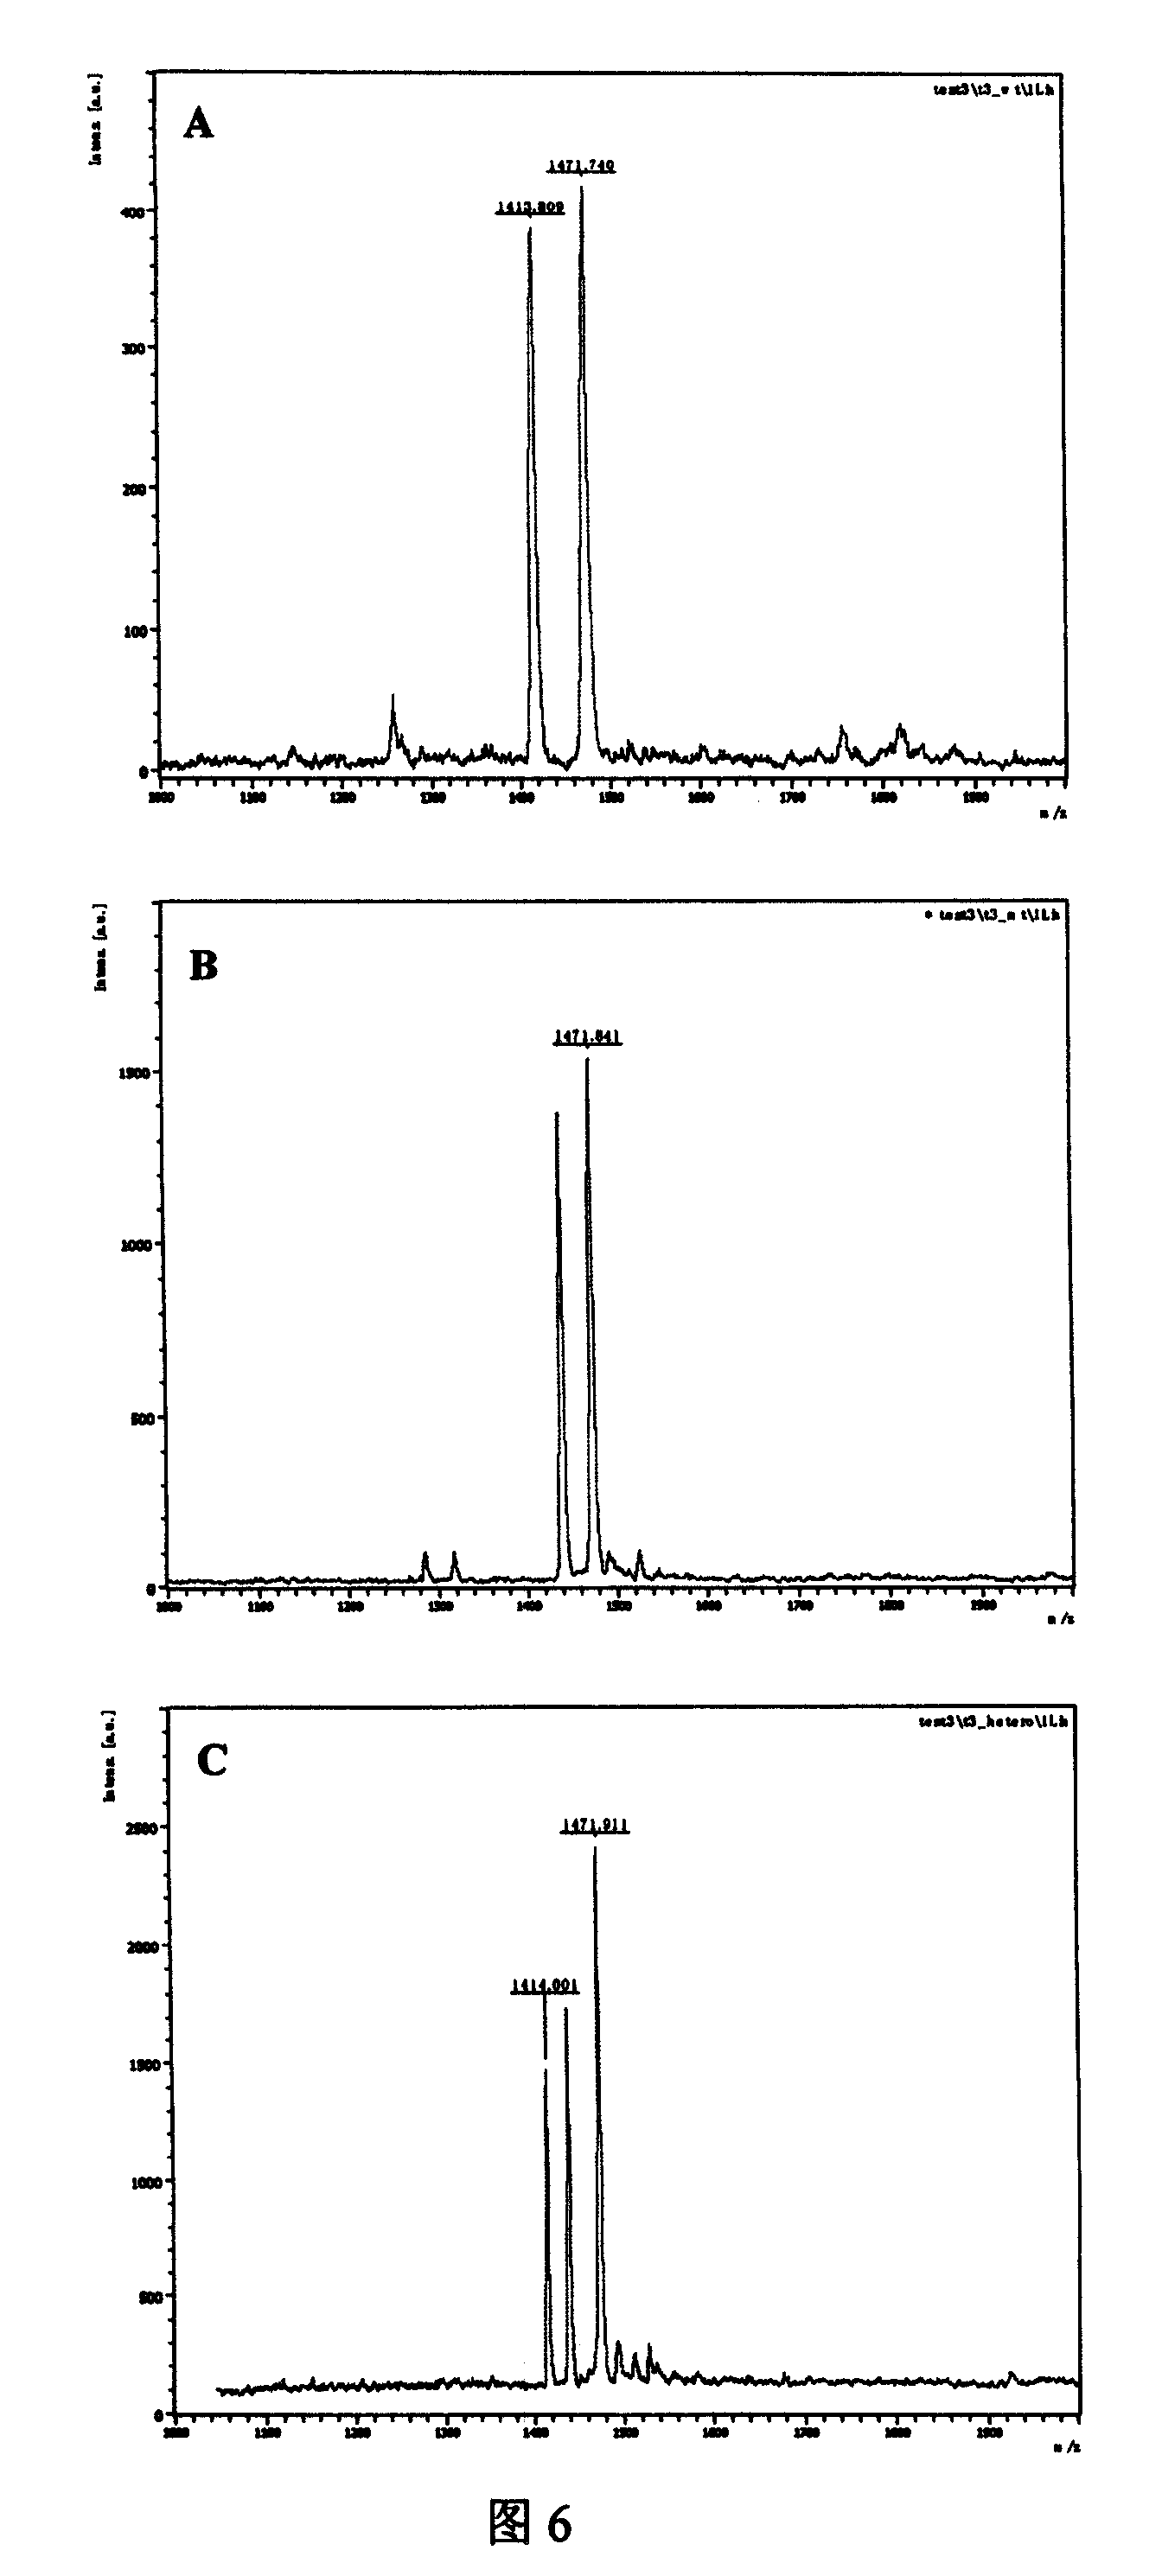 Method for testing SNP combining restrictive zyme cutting method and mass spectrometry